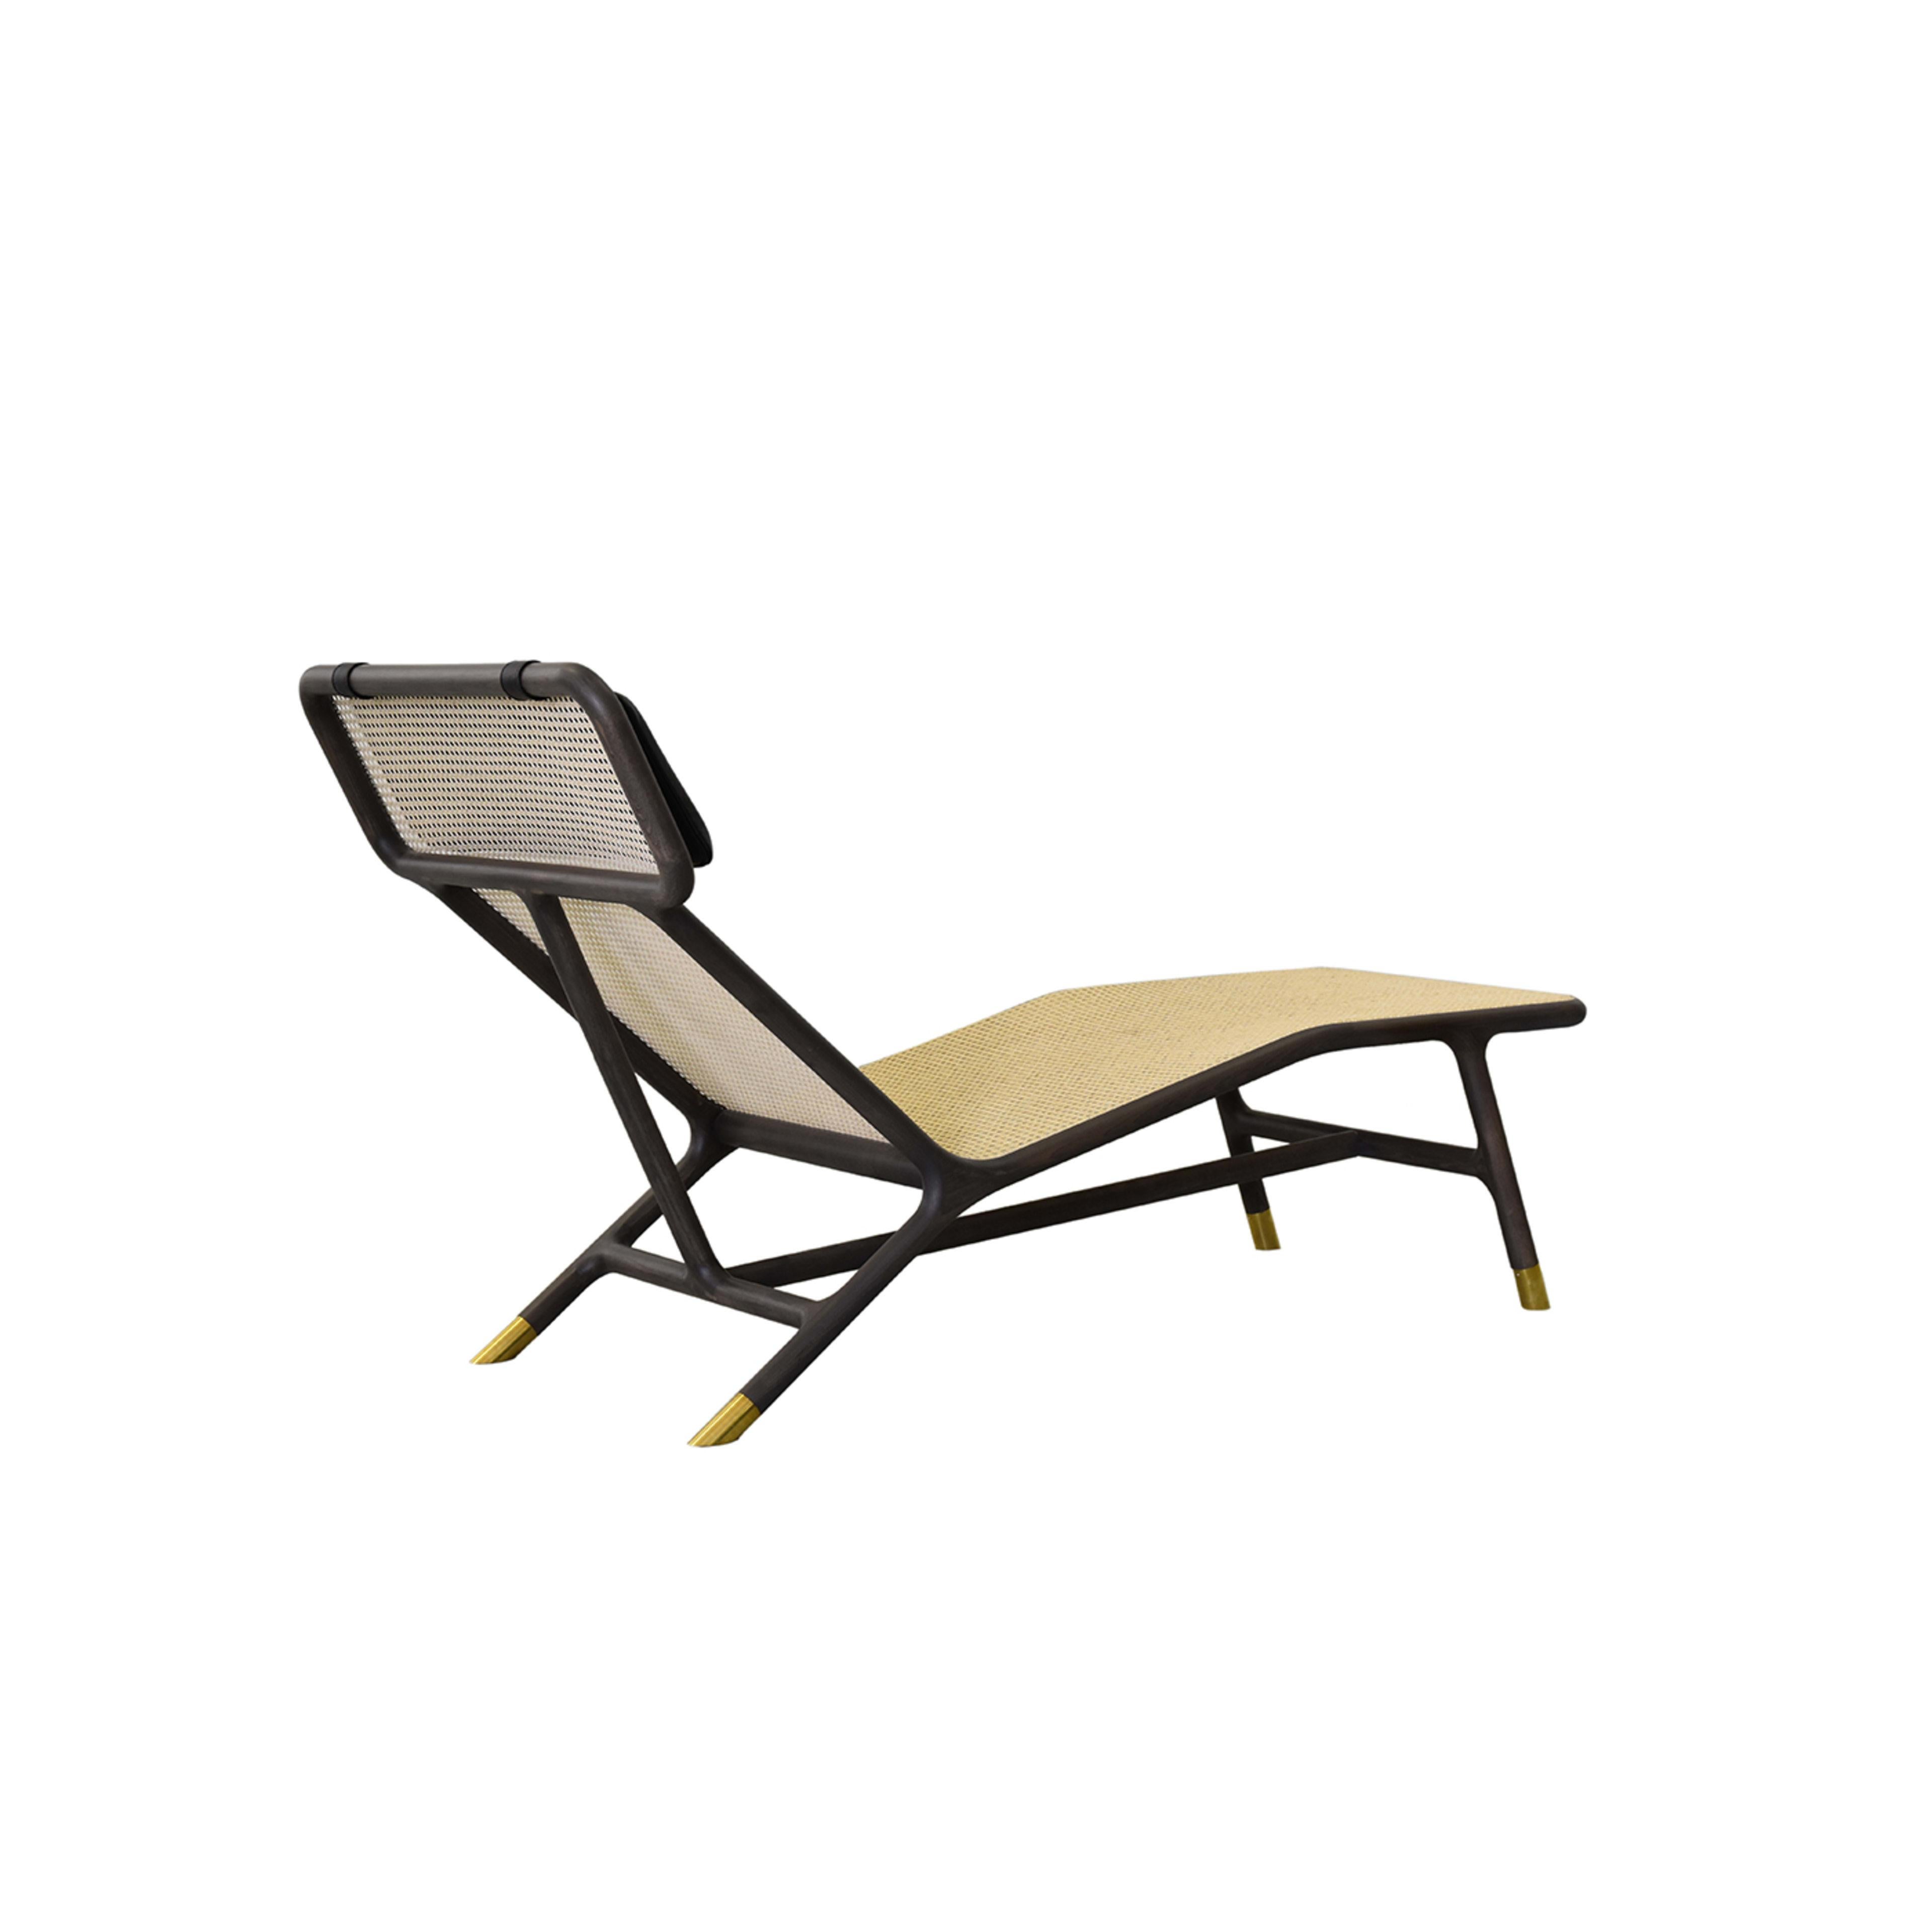 This timeless classic chaise longue will make a chic impact in any area of the home. Showcasing an elegant black finish ash wood structure with polished brass feet, and a remarkable woven Vienna seat. Comes accessorized with a padded matching